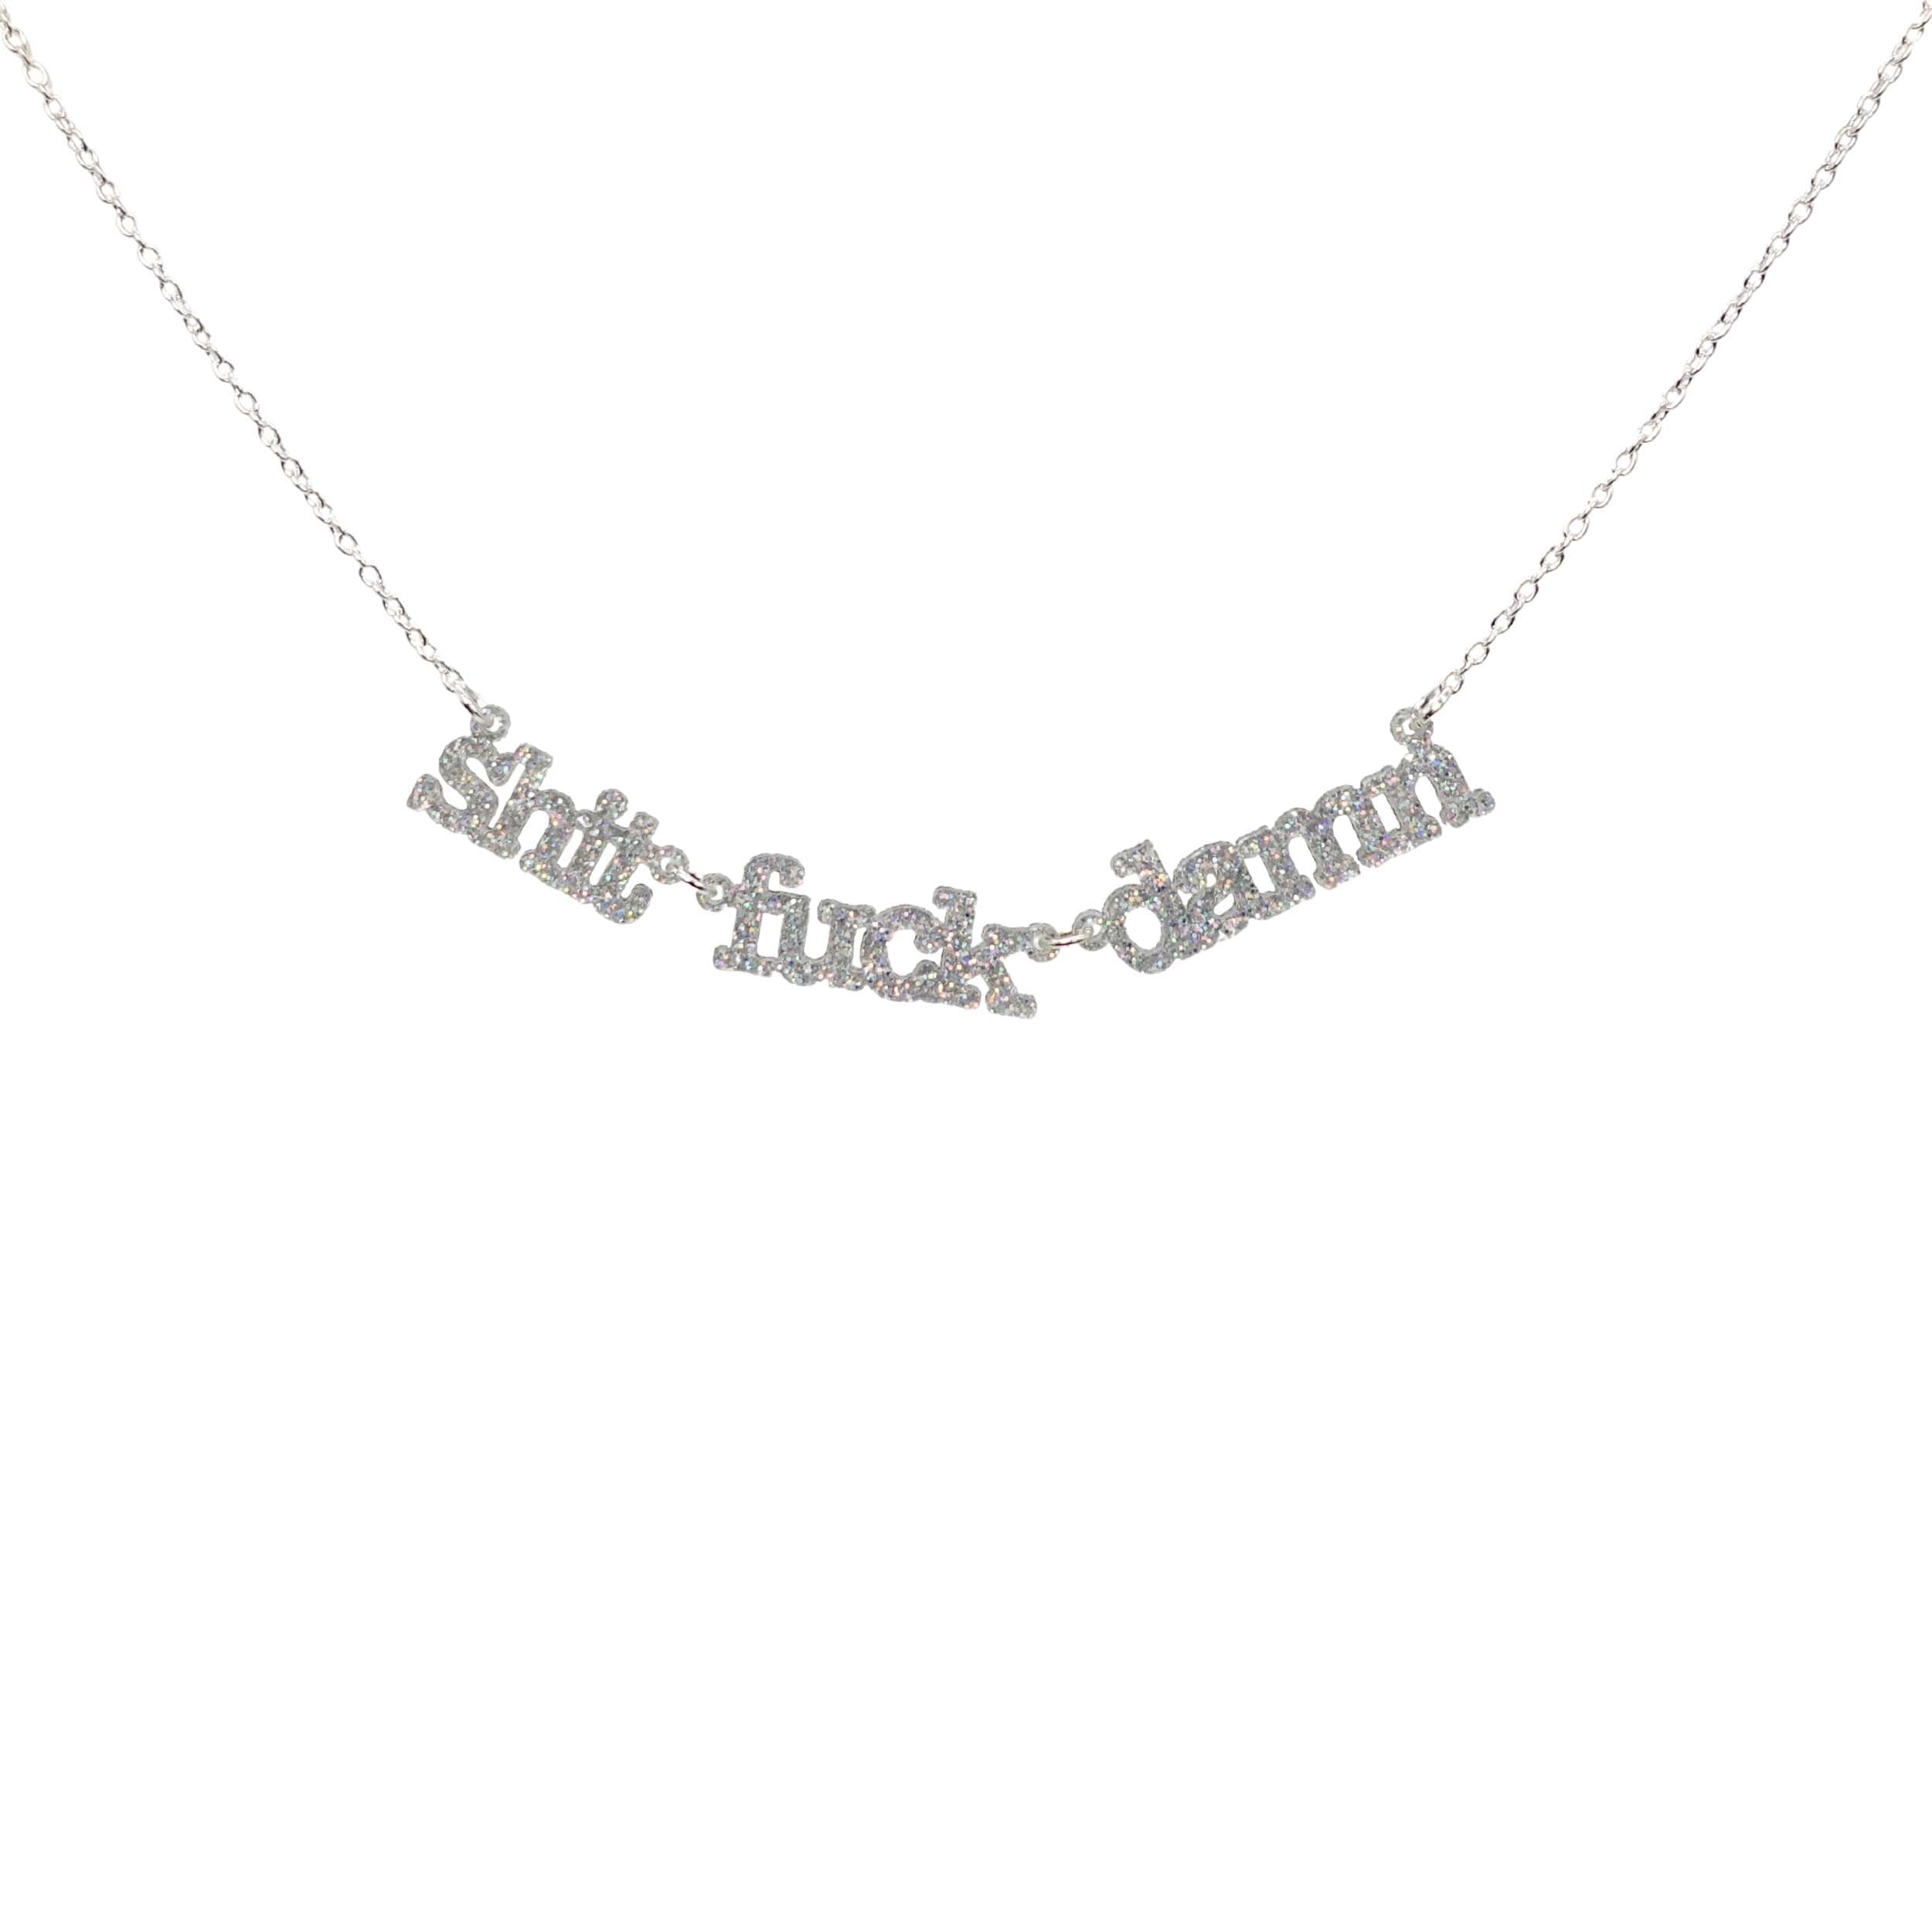 Sh*t f*ck d*mn necklace in silver glitter shown hanging against a white background. Swearing is caring! 